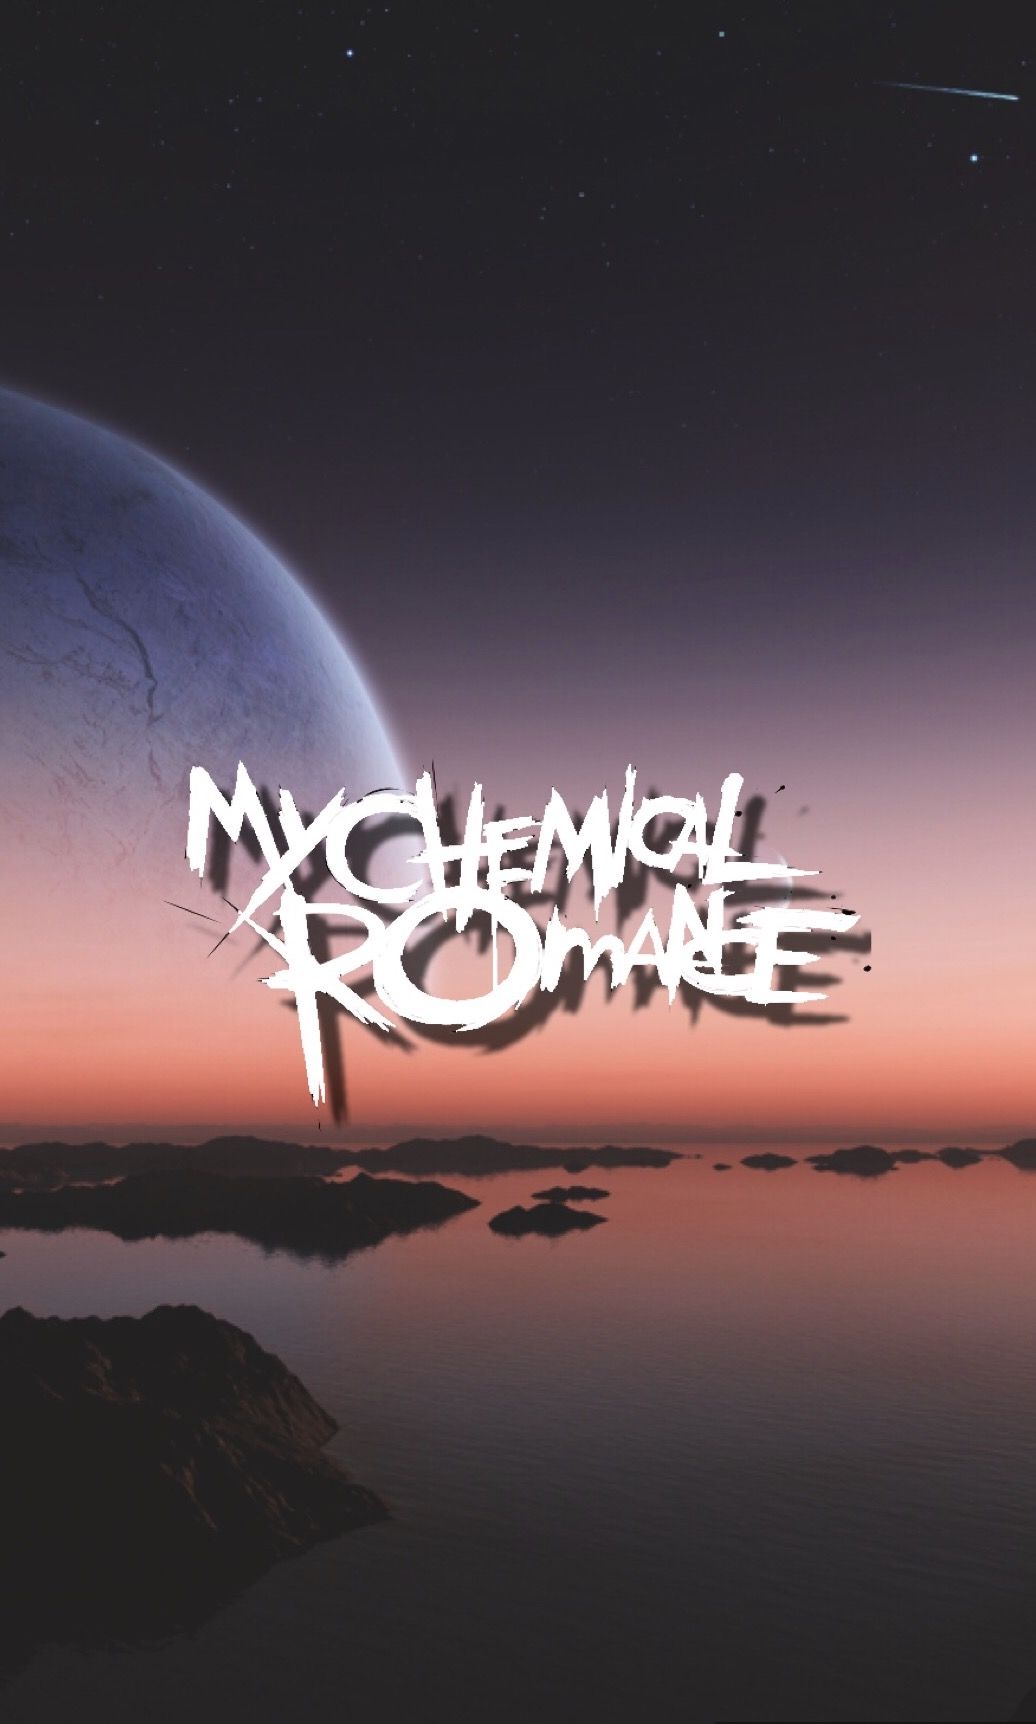 My Chemical Romance background tumblr. My chemical romance wallpaper, My chemical romance, Cool wallpaper for phones